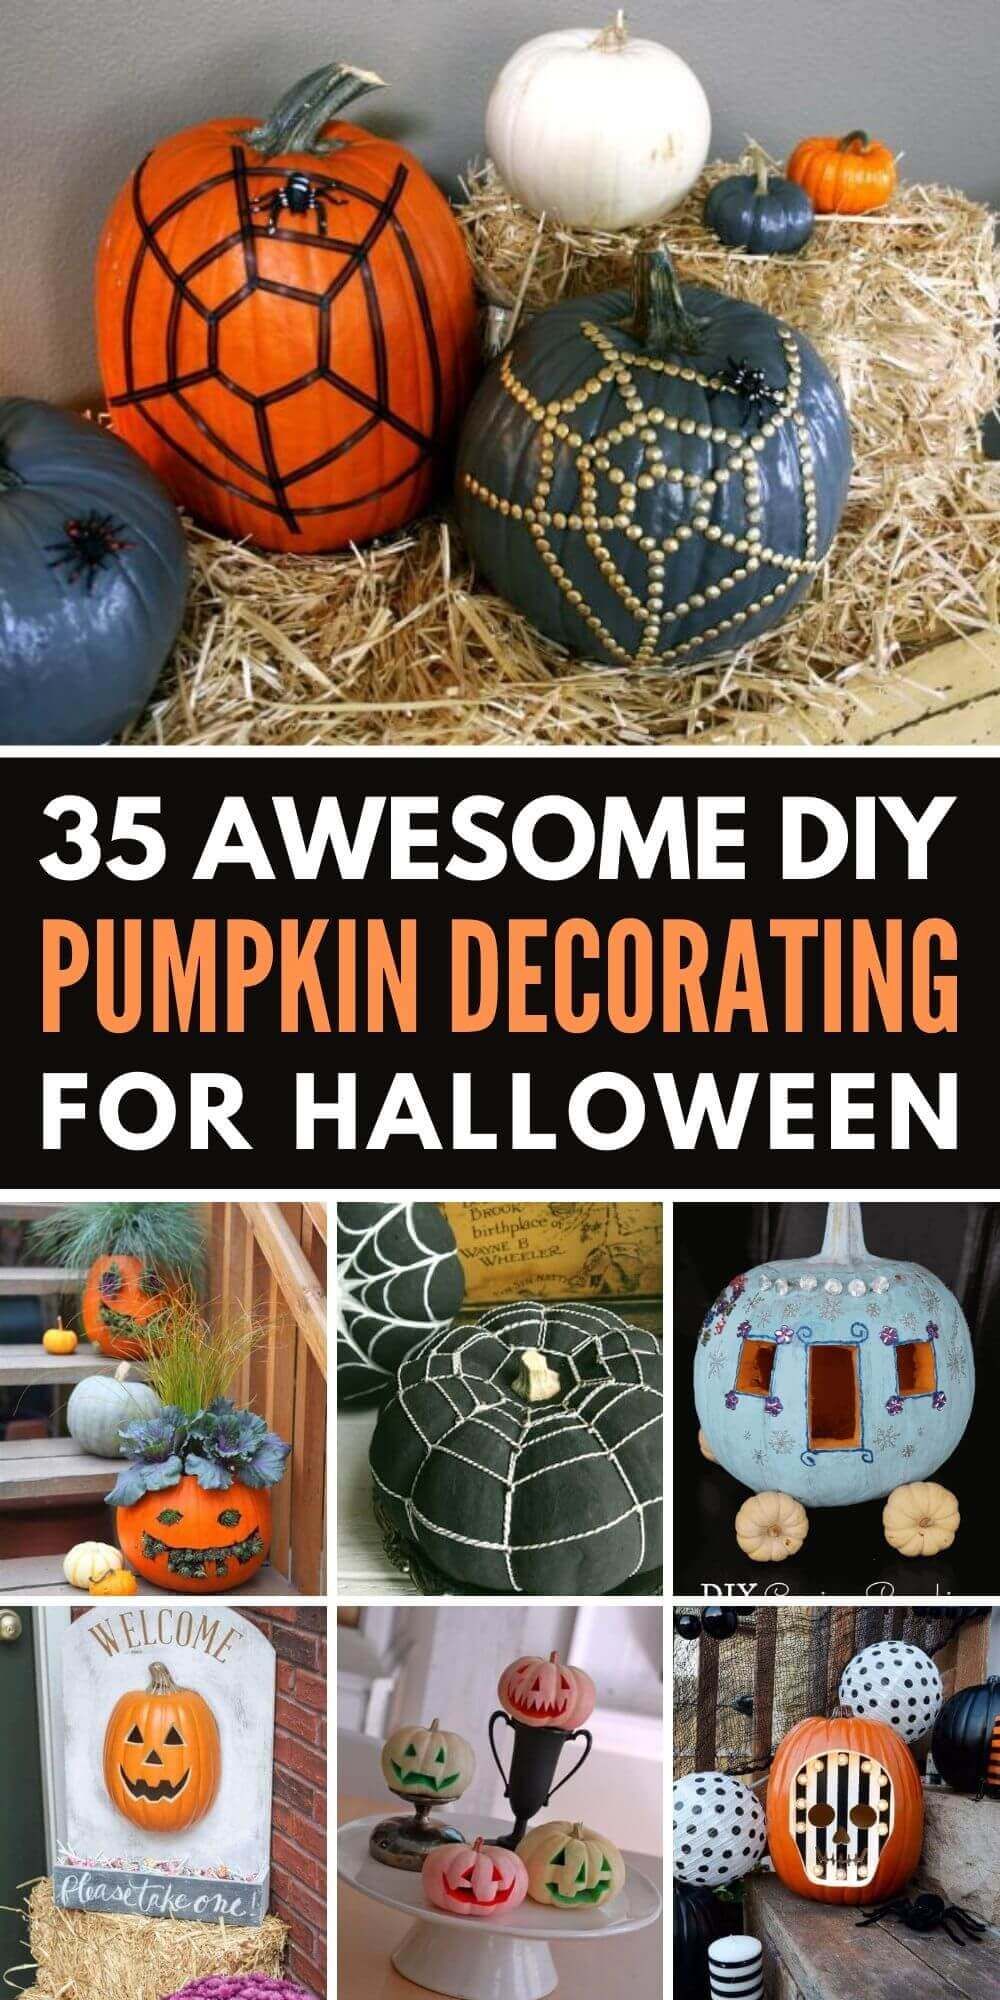 35 Awesome DIY Pumpkin Decorating Ideas For Halloween